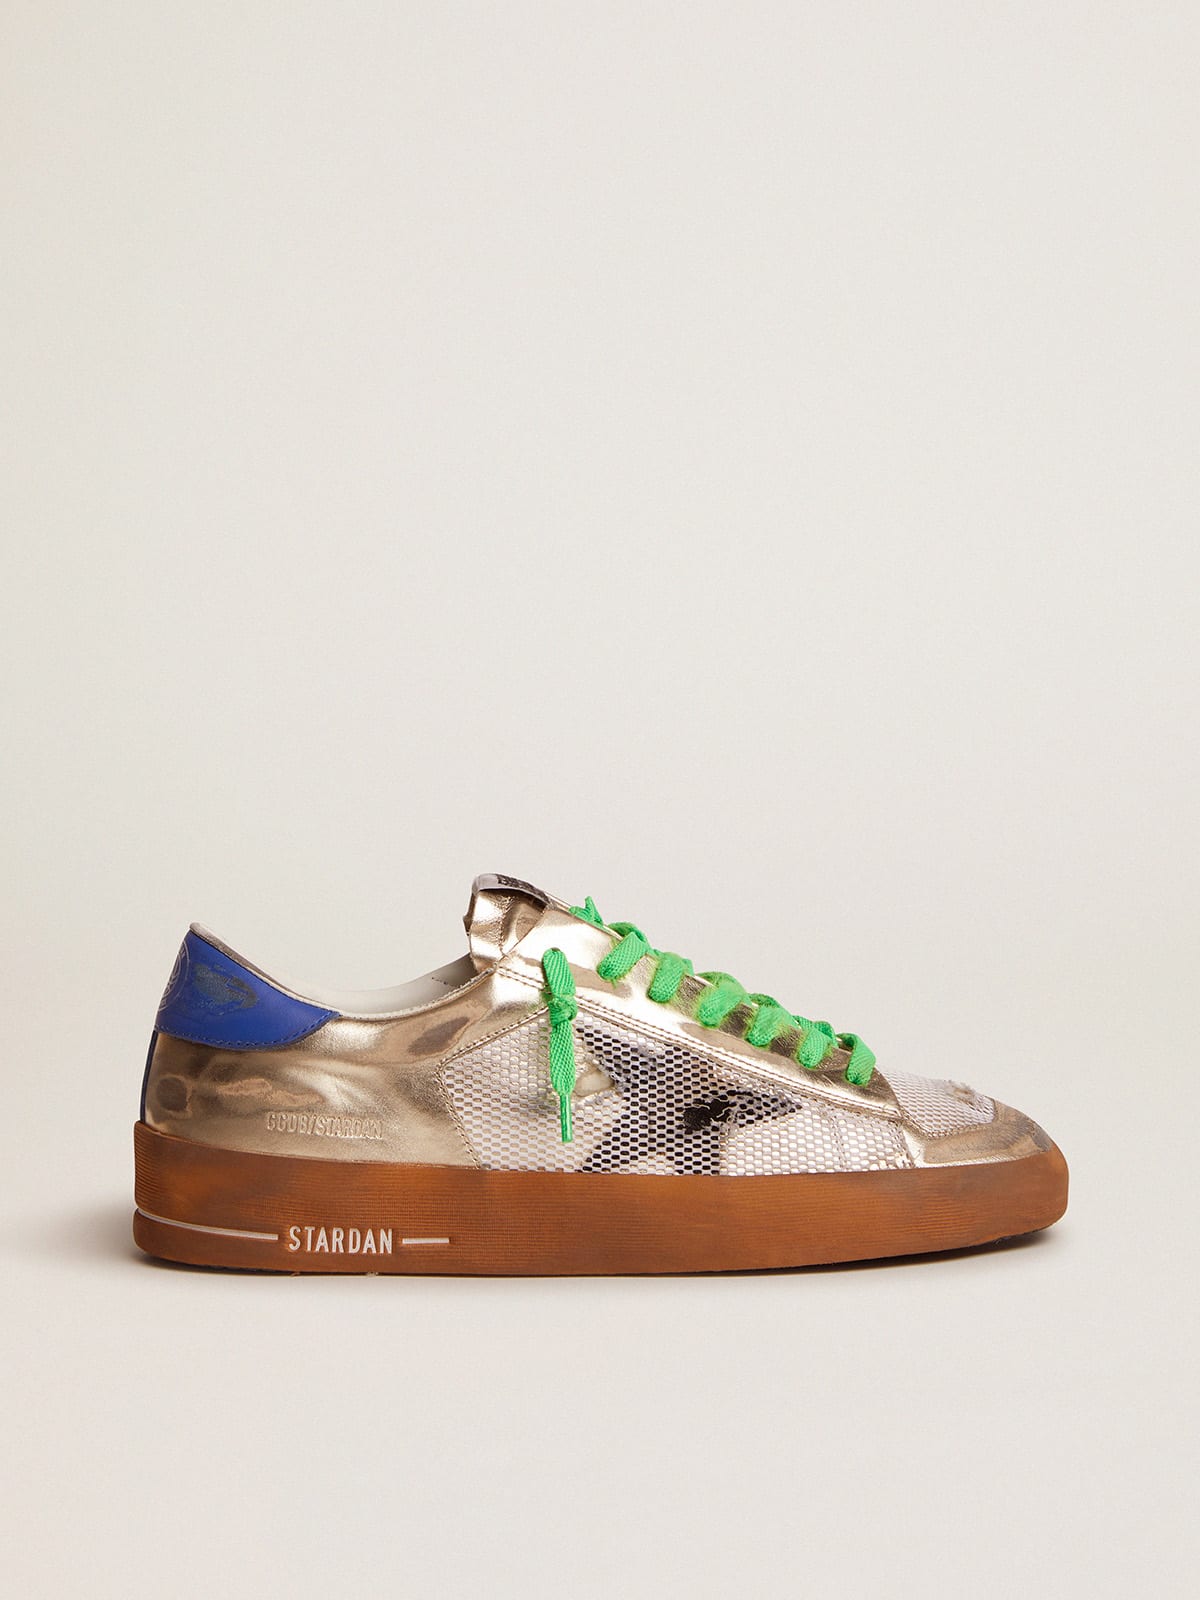 Women's Stardan LAB sneakers in laminated leather and mesh with a blue heel tab